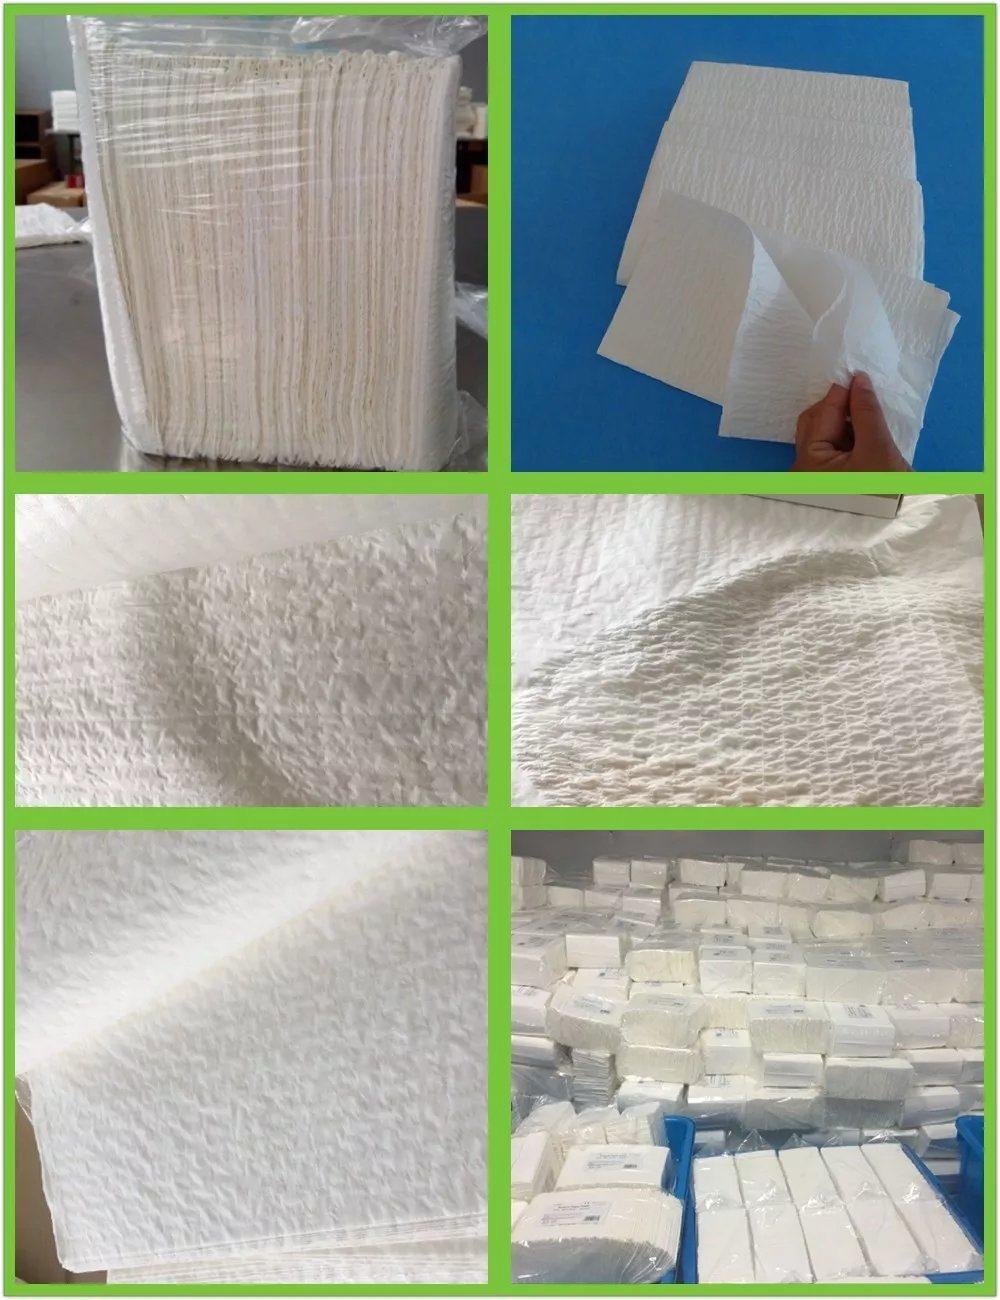 Medical Health Cleaning Surgical Use Hand Paper Towel